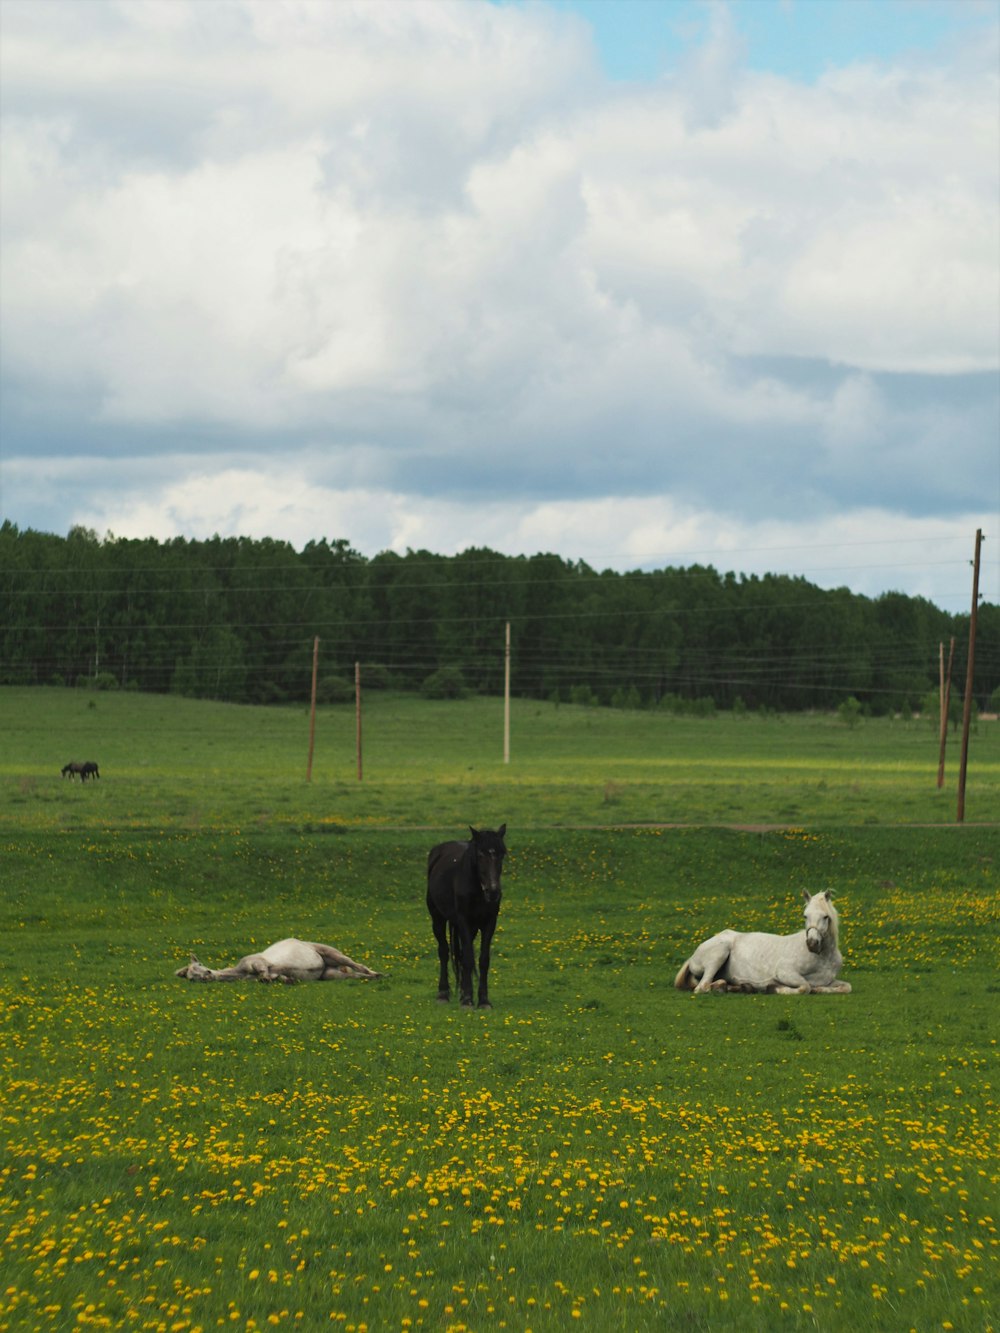 white and black horses on green grass field under white clouds during daytime